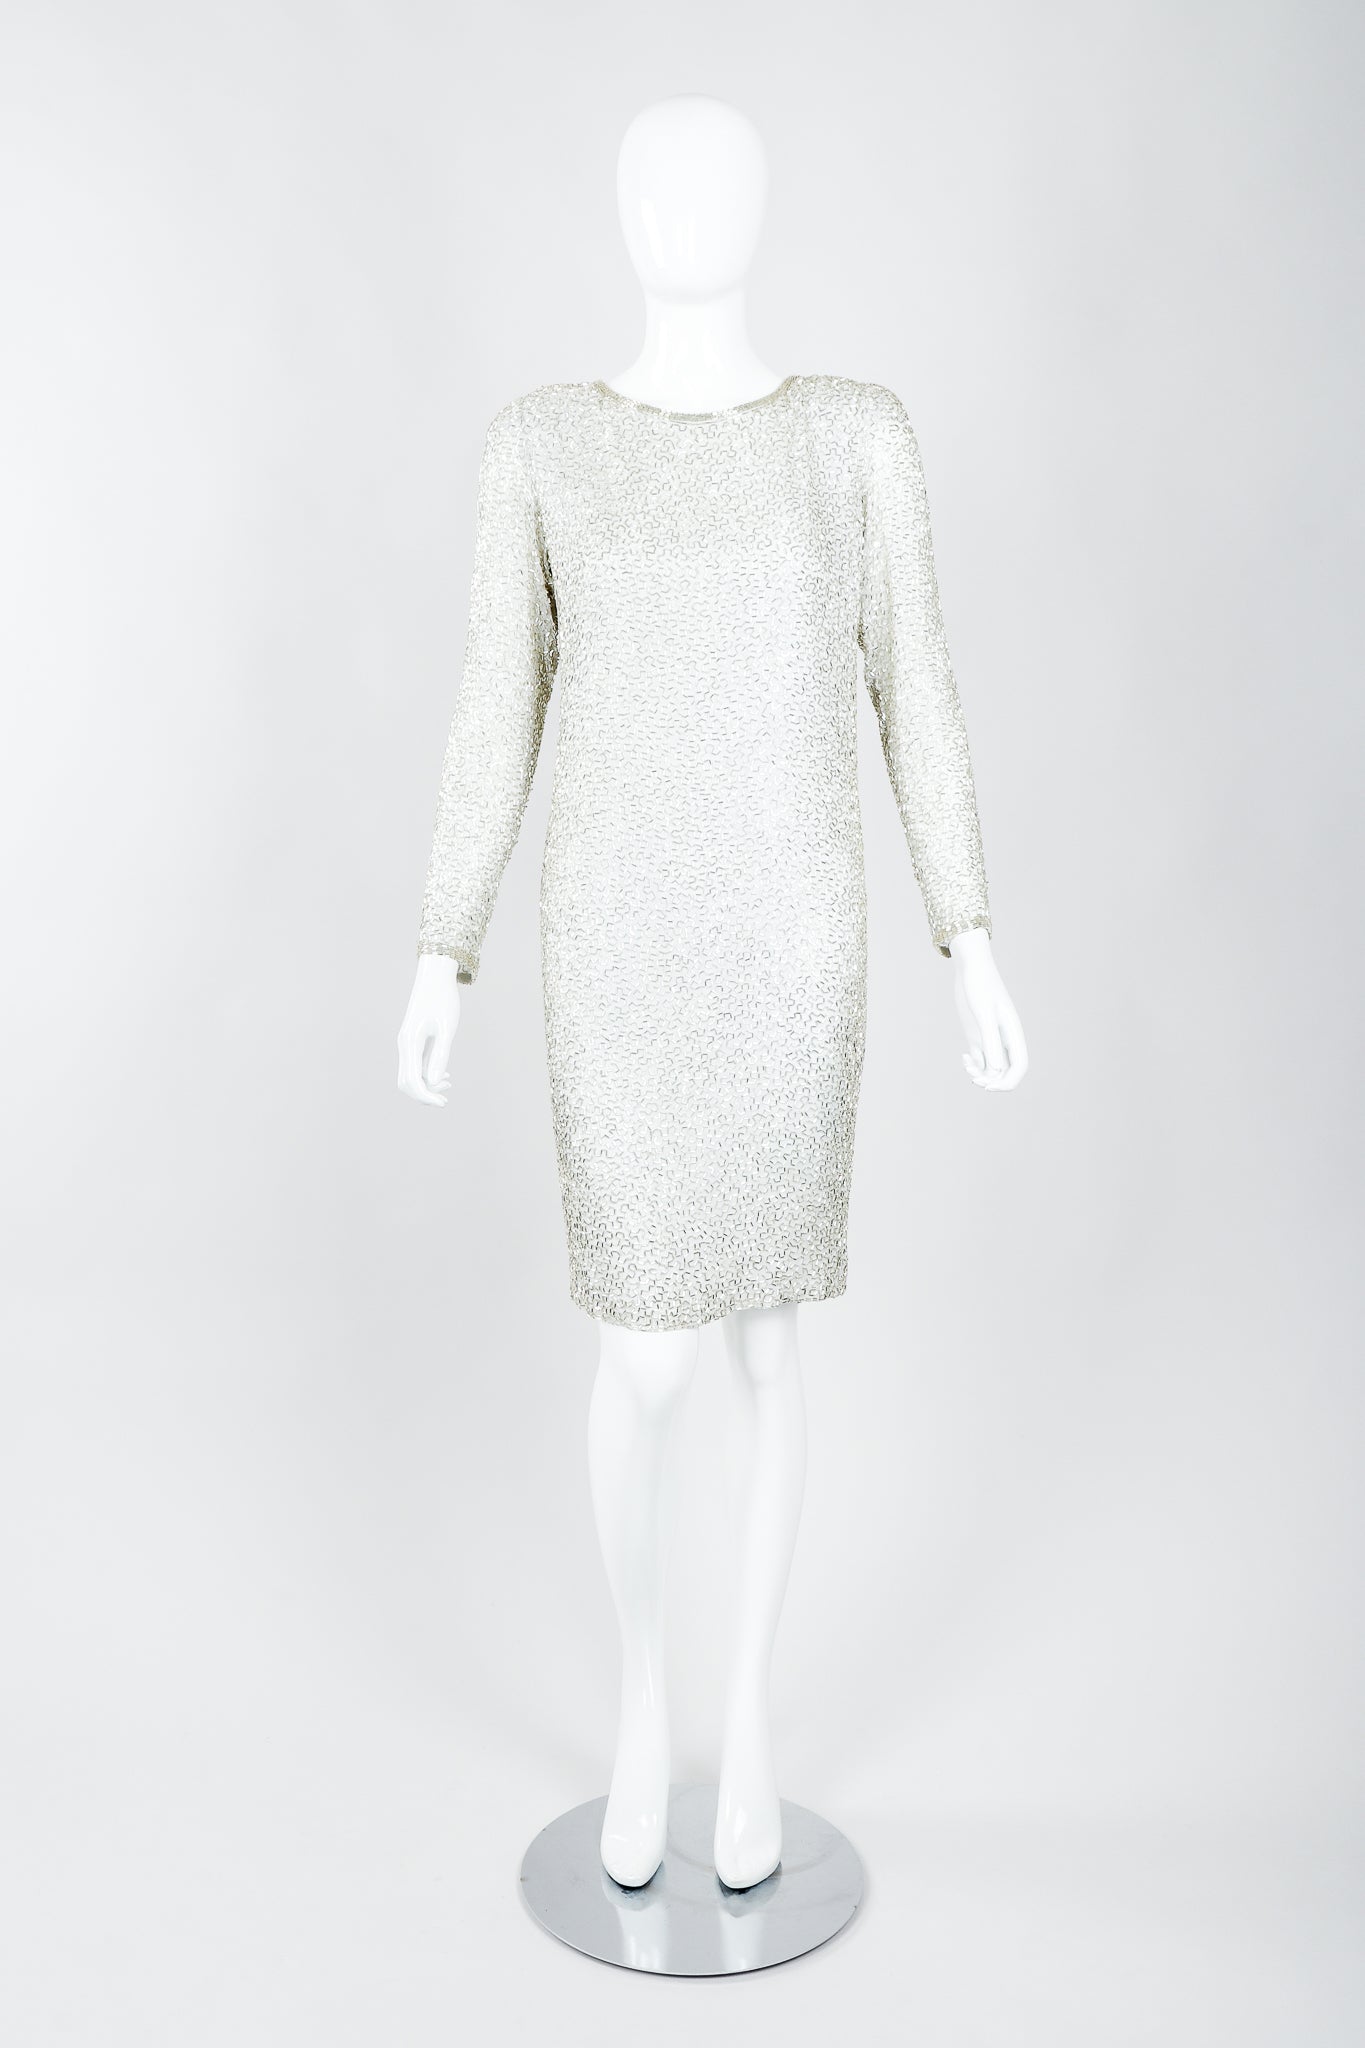 Vintage Oleg Cassini Black Tie Silver Beaded Cowl Dress on Mannequin, Front at Recess Los Angeles